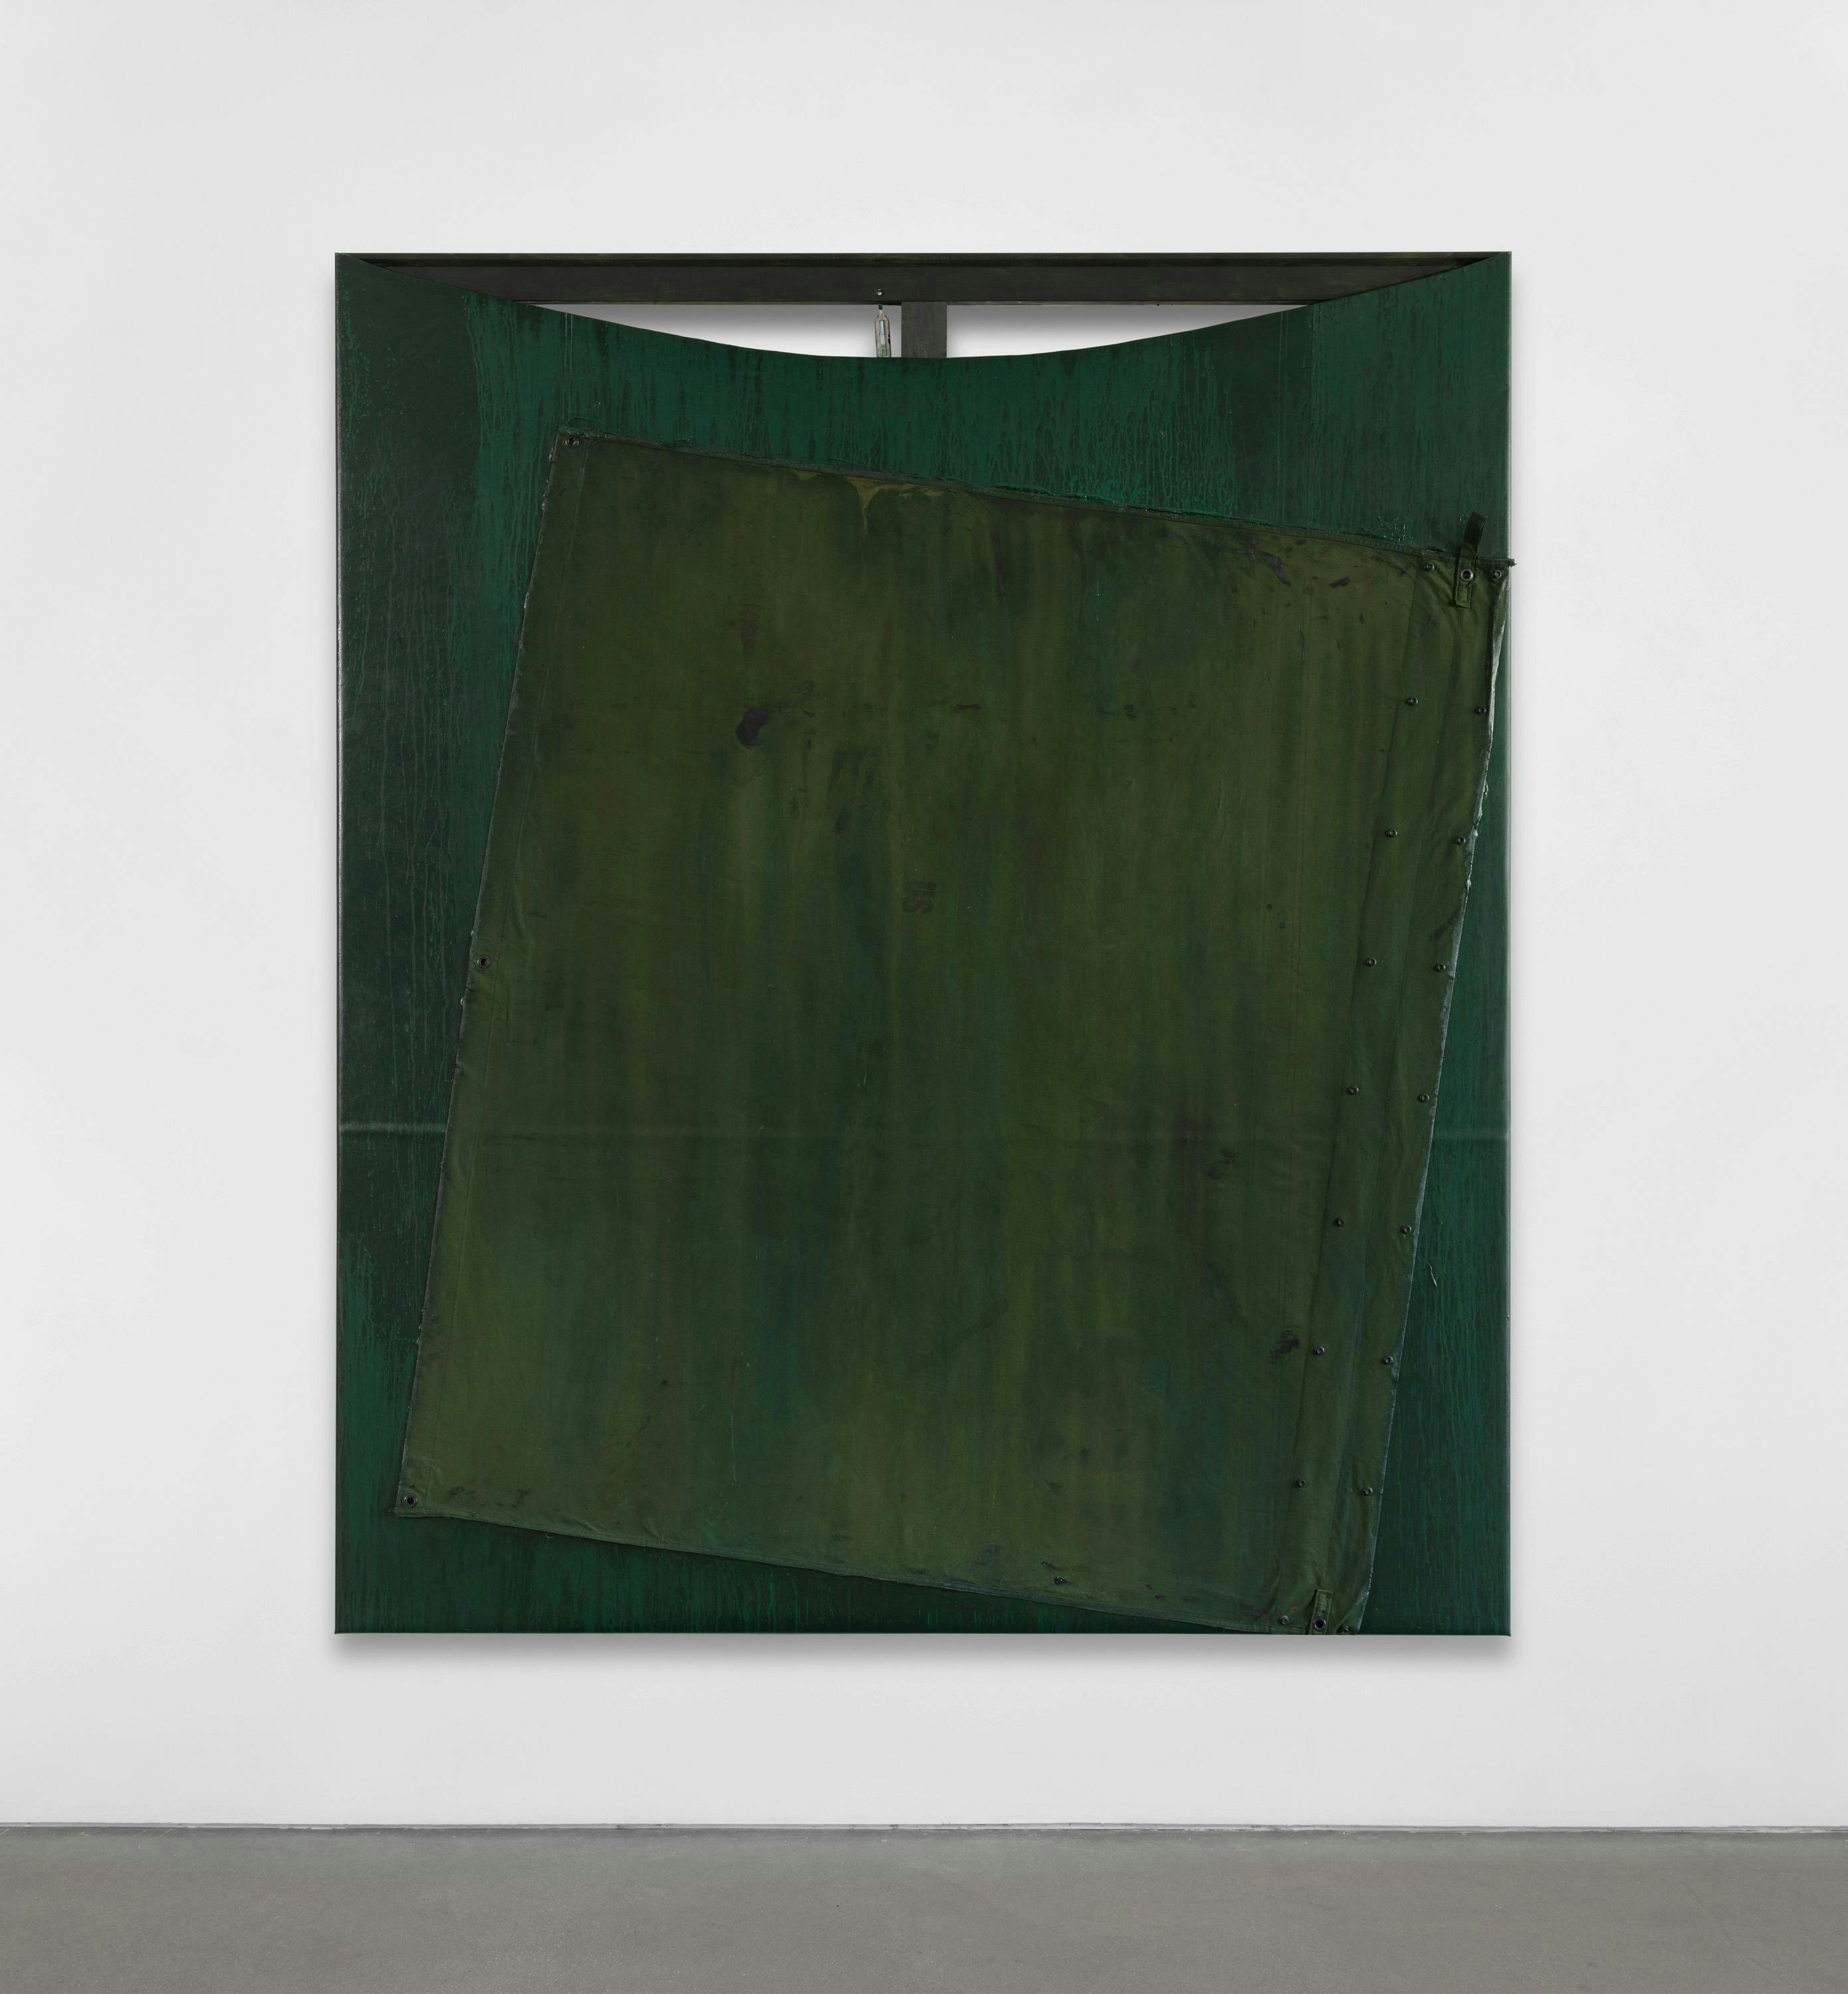 Green artwork by Reginald Sylvester II hanging on a white wall above a concrete floor.